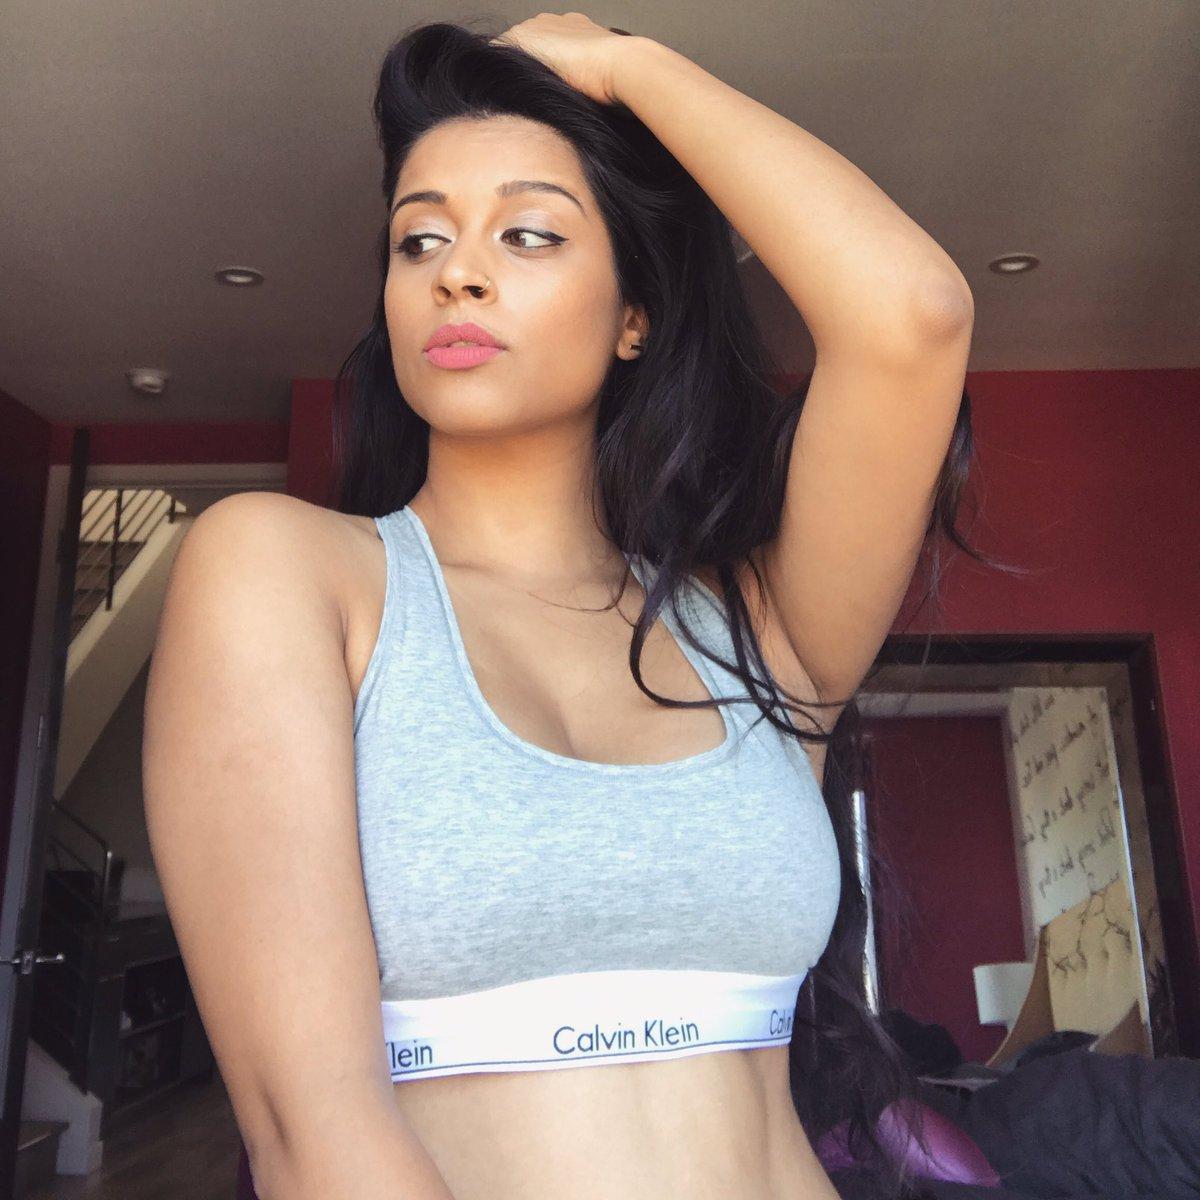 51 Hottest Lilly Singh Big Butt Pictures That Make Certain To Make You Her Greatest Admirer | Best Of Comic Books